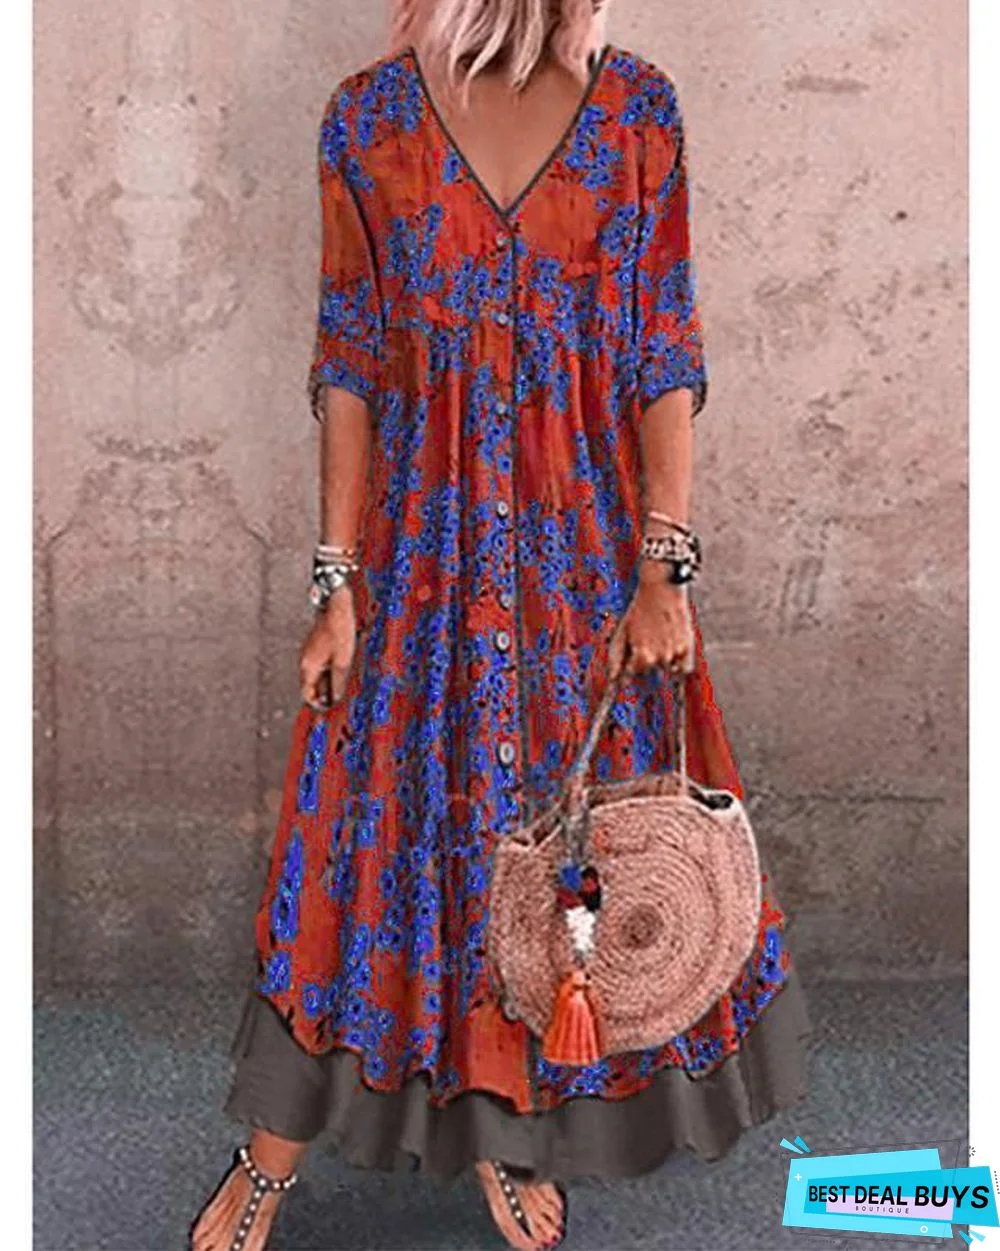 Women's A-Line Dress Maxi Long Dress - Half Sleeve Floral Layered Button Print Spring & Summer Deep V Hot Casual Holiday Vacation Dresses Loose Red Green Gray